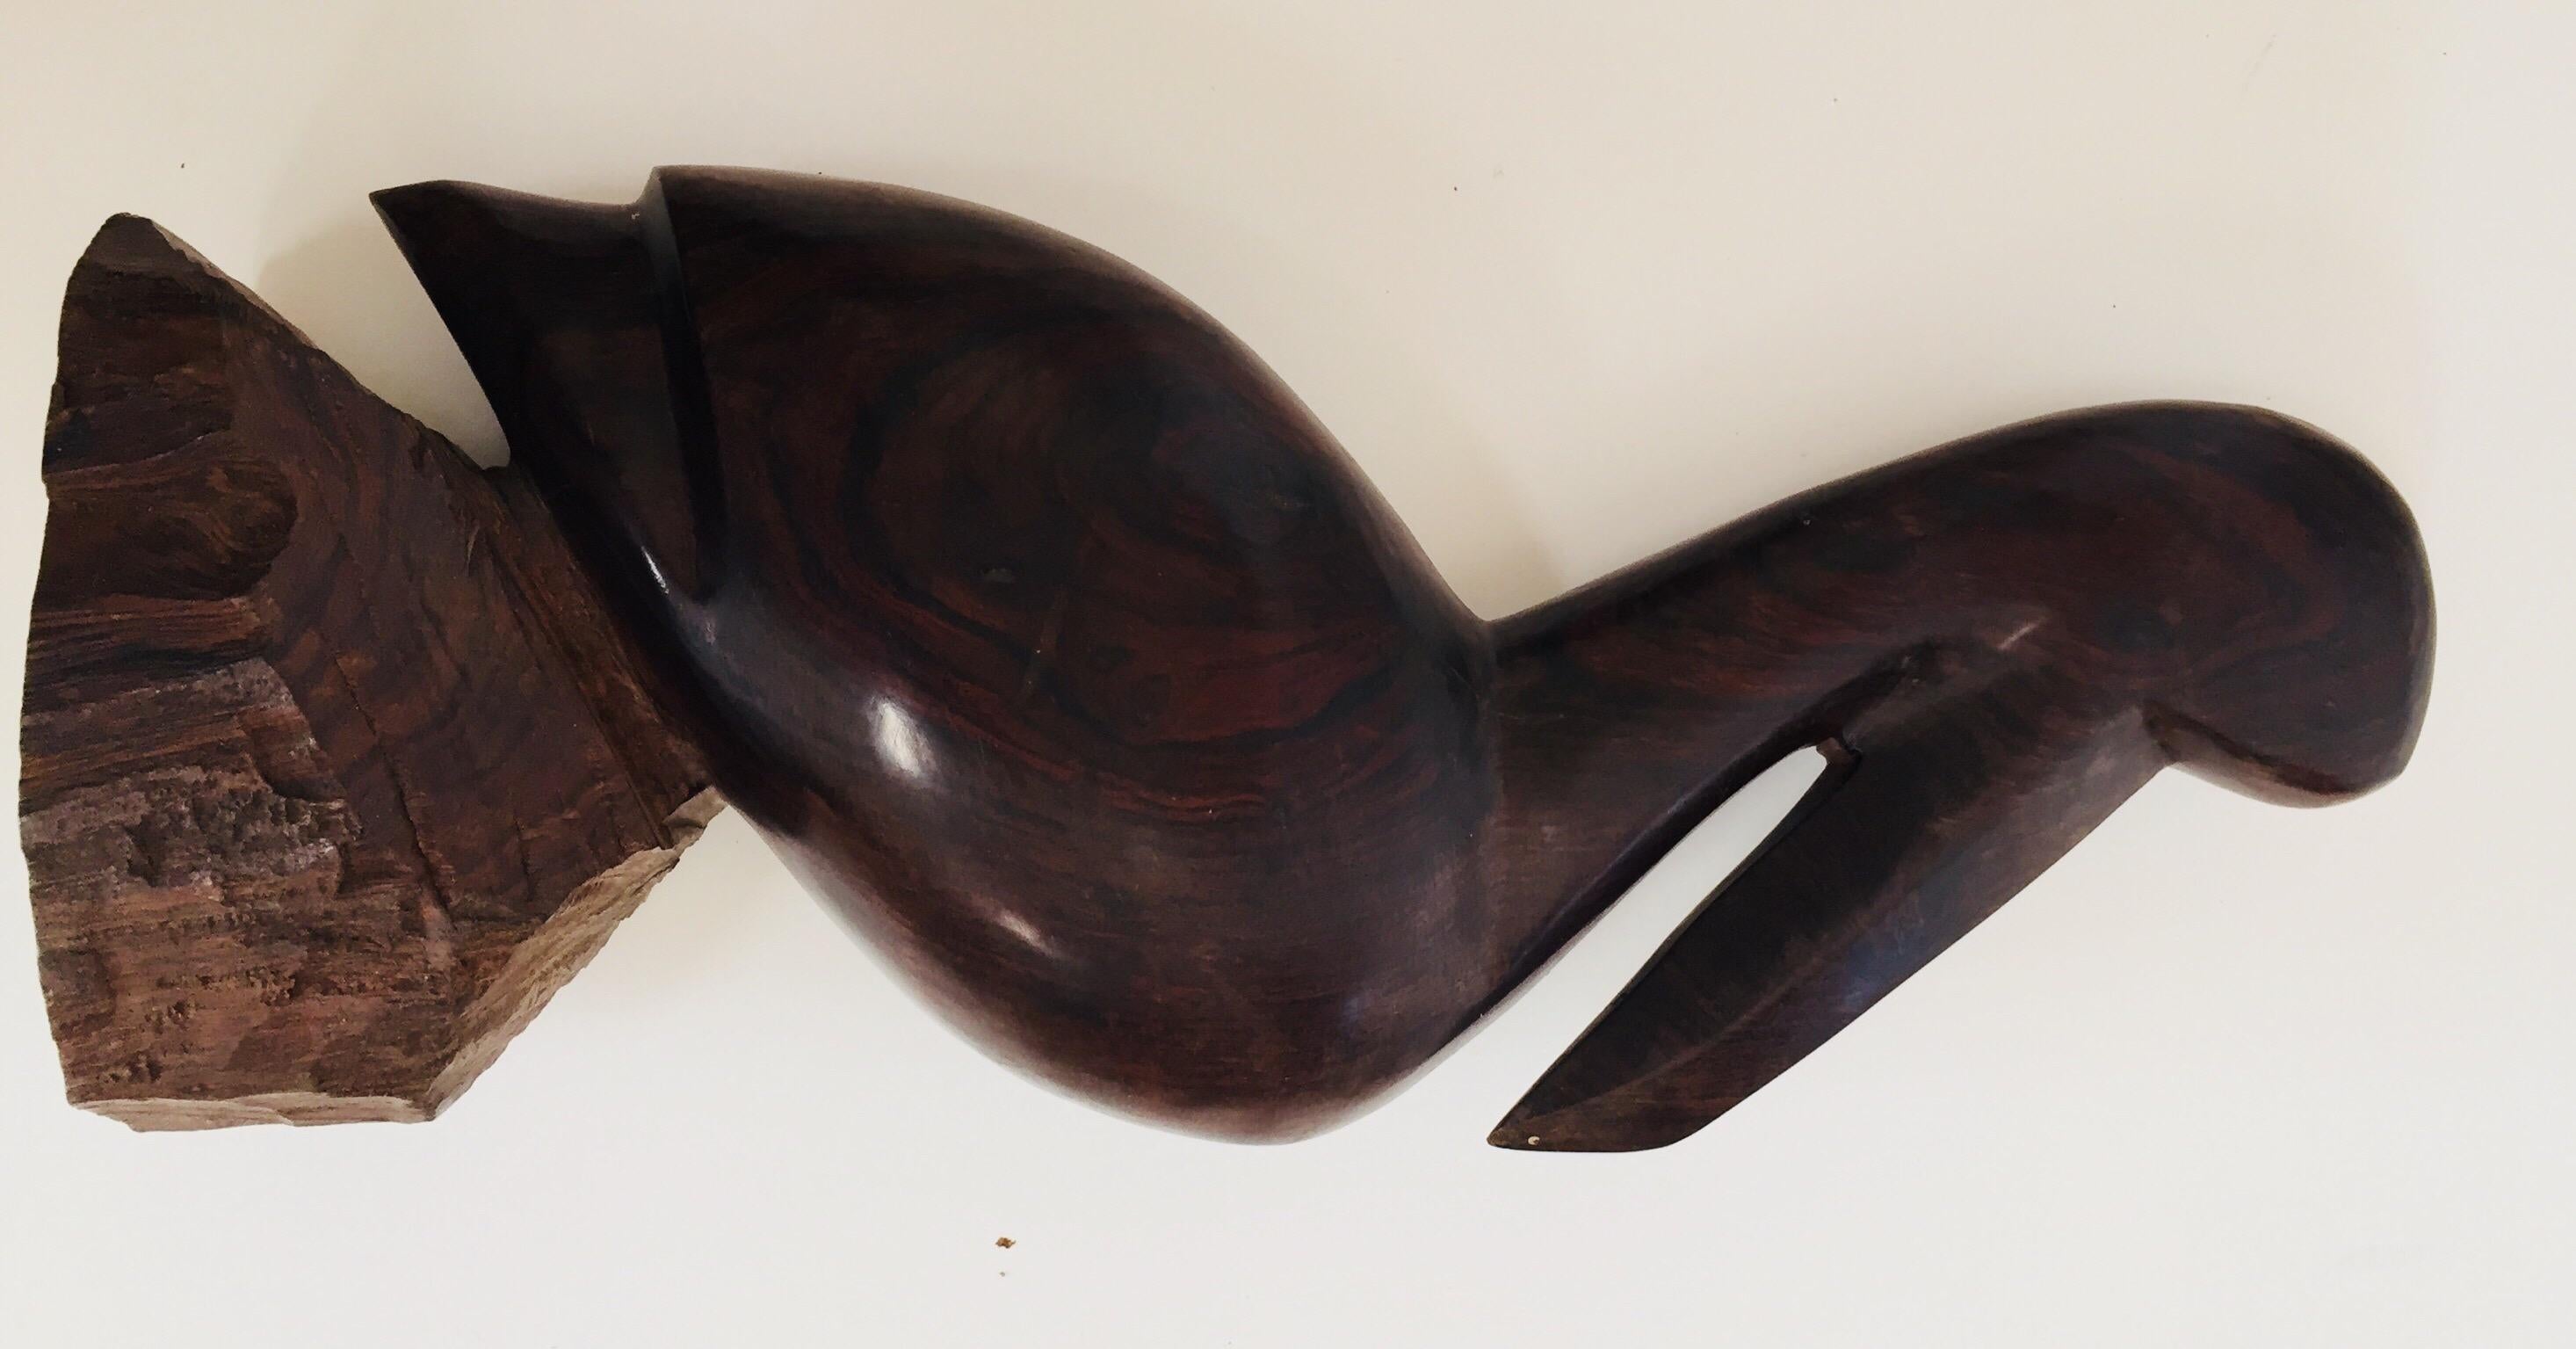 Seri Ironwood Animal Sculptures of a Pelican and a Whale 1